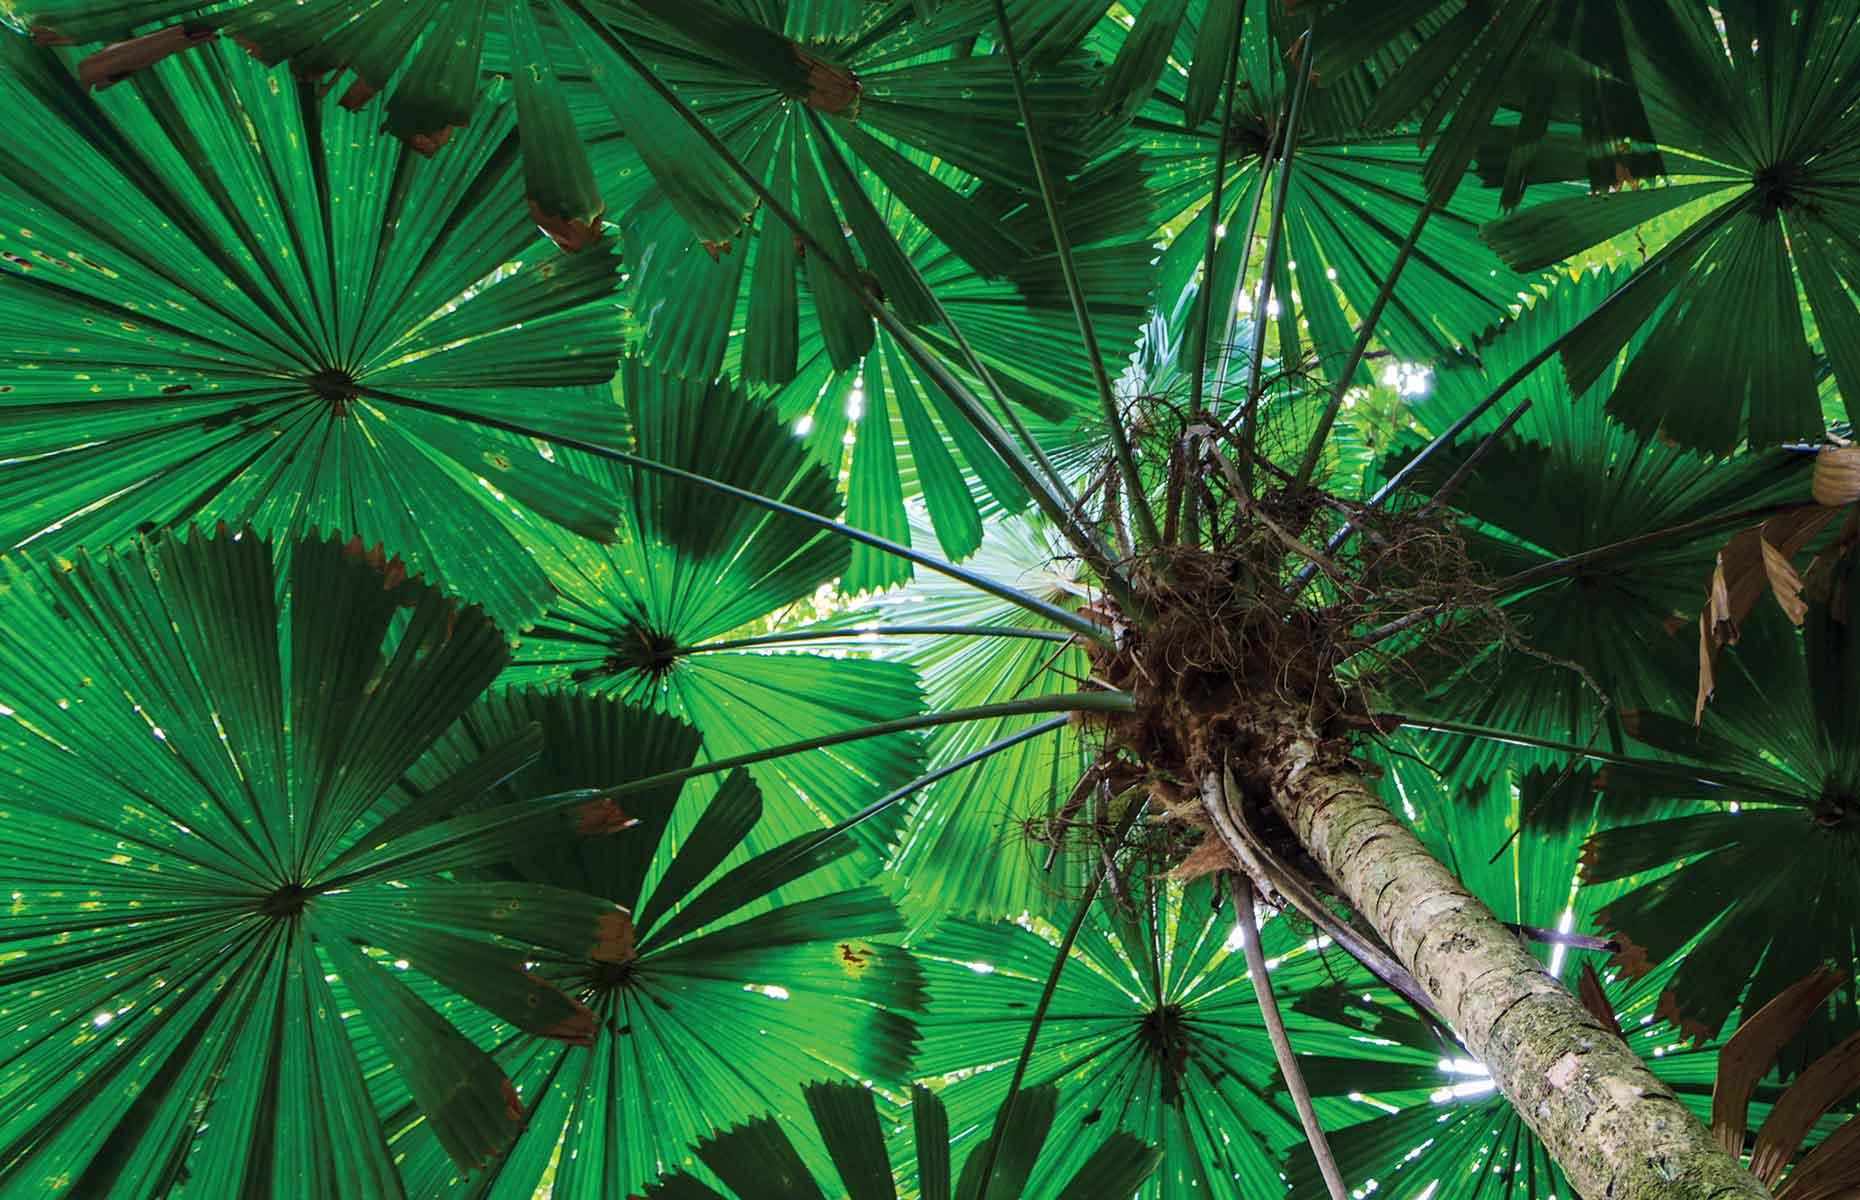 <p>The leaves of the Australian fan palm, which is native to northern Queensland, grow up to six feet (2m) long to form a near-perfect circle. The palm’s fruits are eaten by the southern cassowary bird, while the tree’s leaves can be used for thatch and food wrapping.</p>  <p><strong><a href="http://bit.ly/3roL4wv">Love this? Follow our Facebook page for more travel inspiration</a></strong></p>